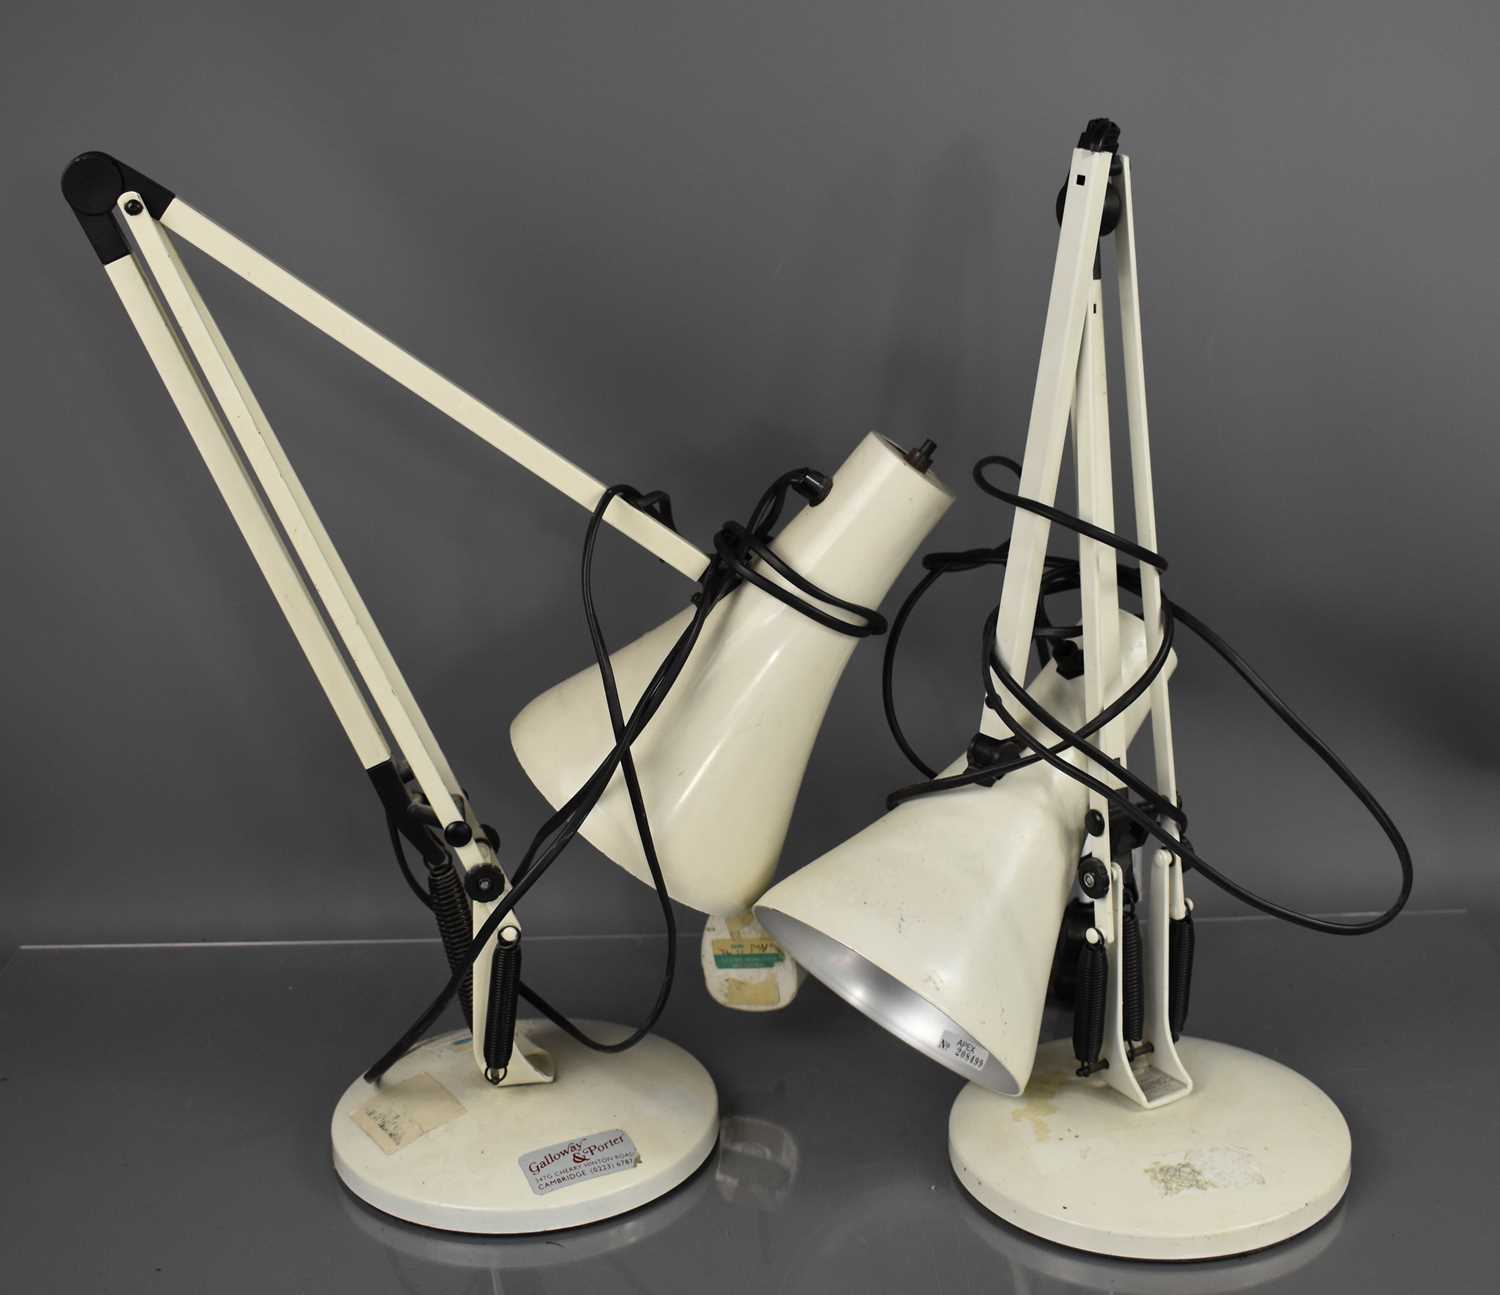 A pair of vintage Terry's Anglepoise lamps